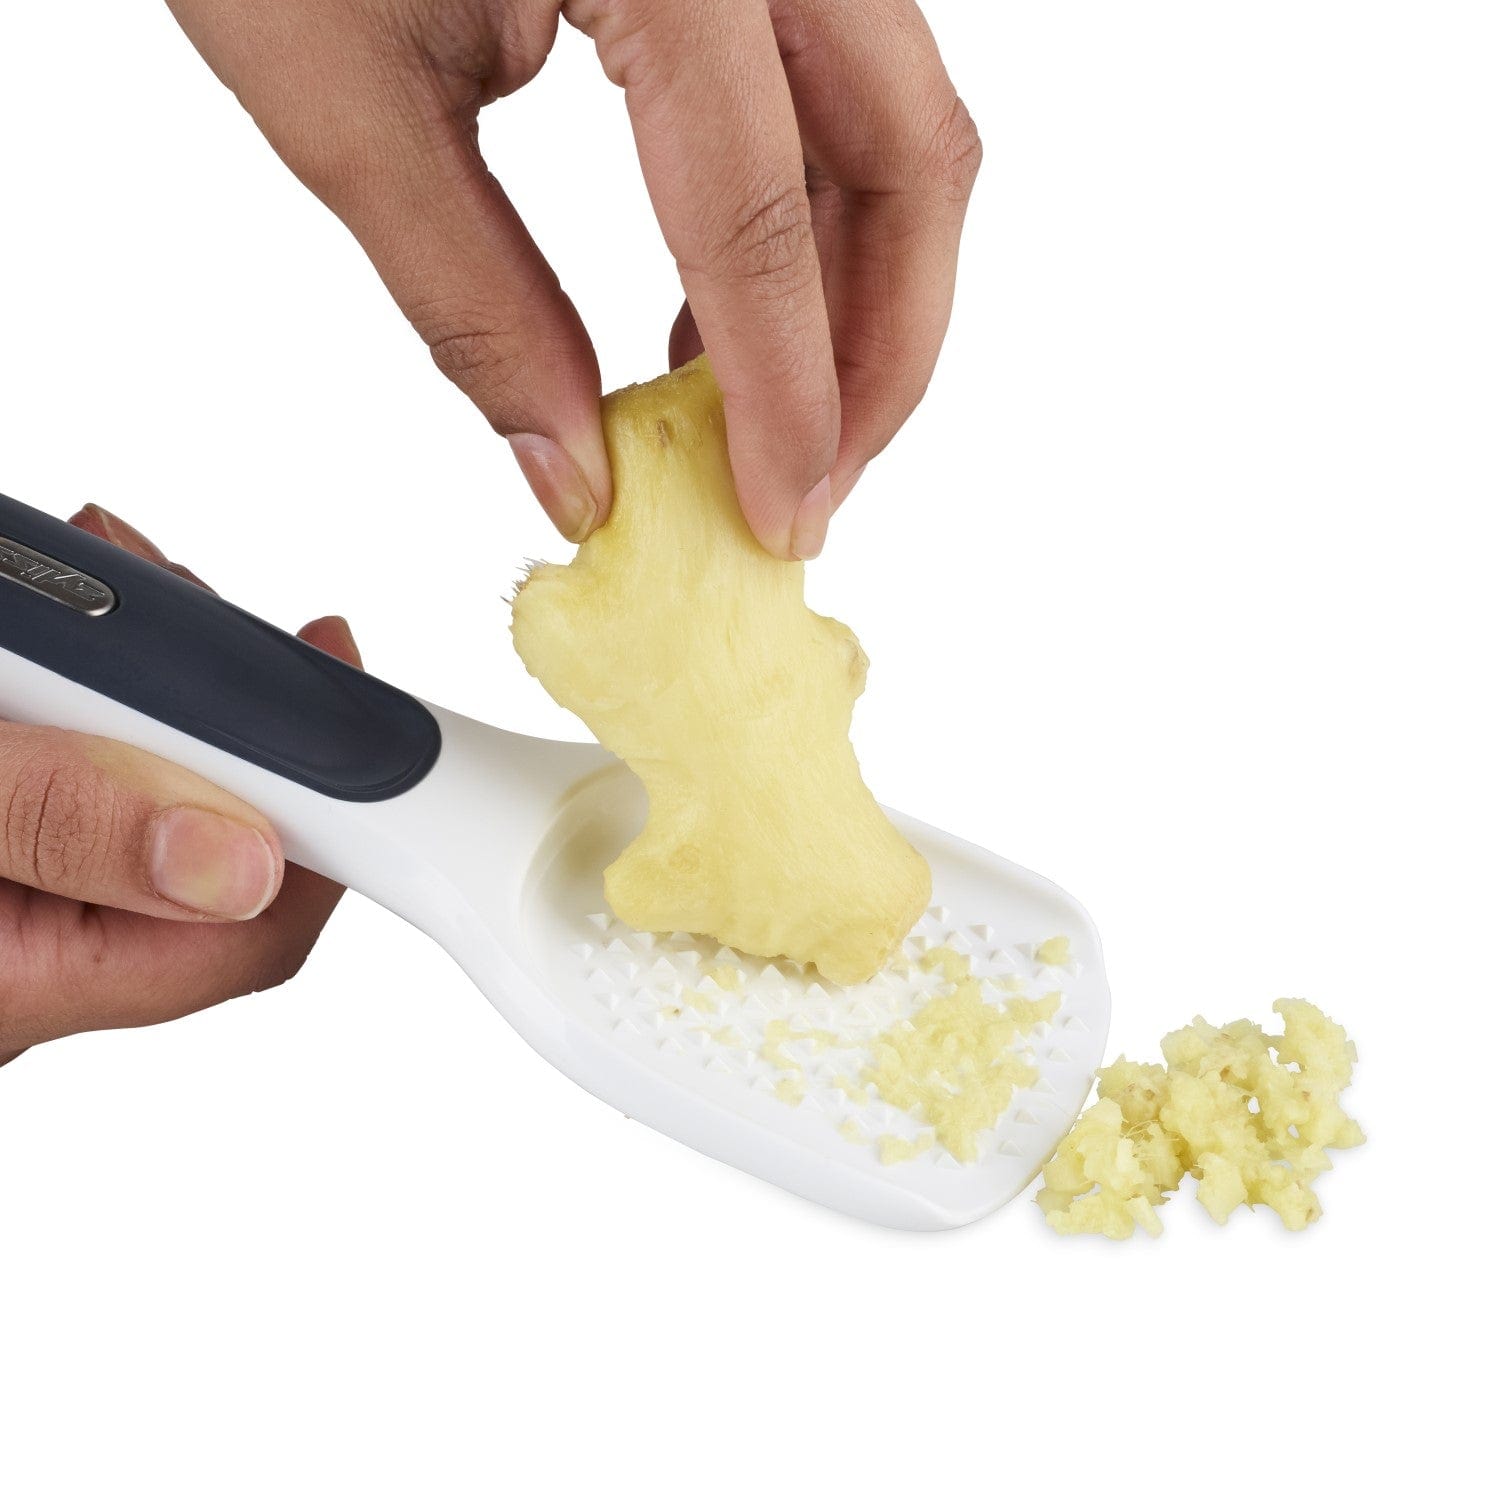 Zyliss Peel & Grate Ginger Tool - Discontinued